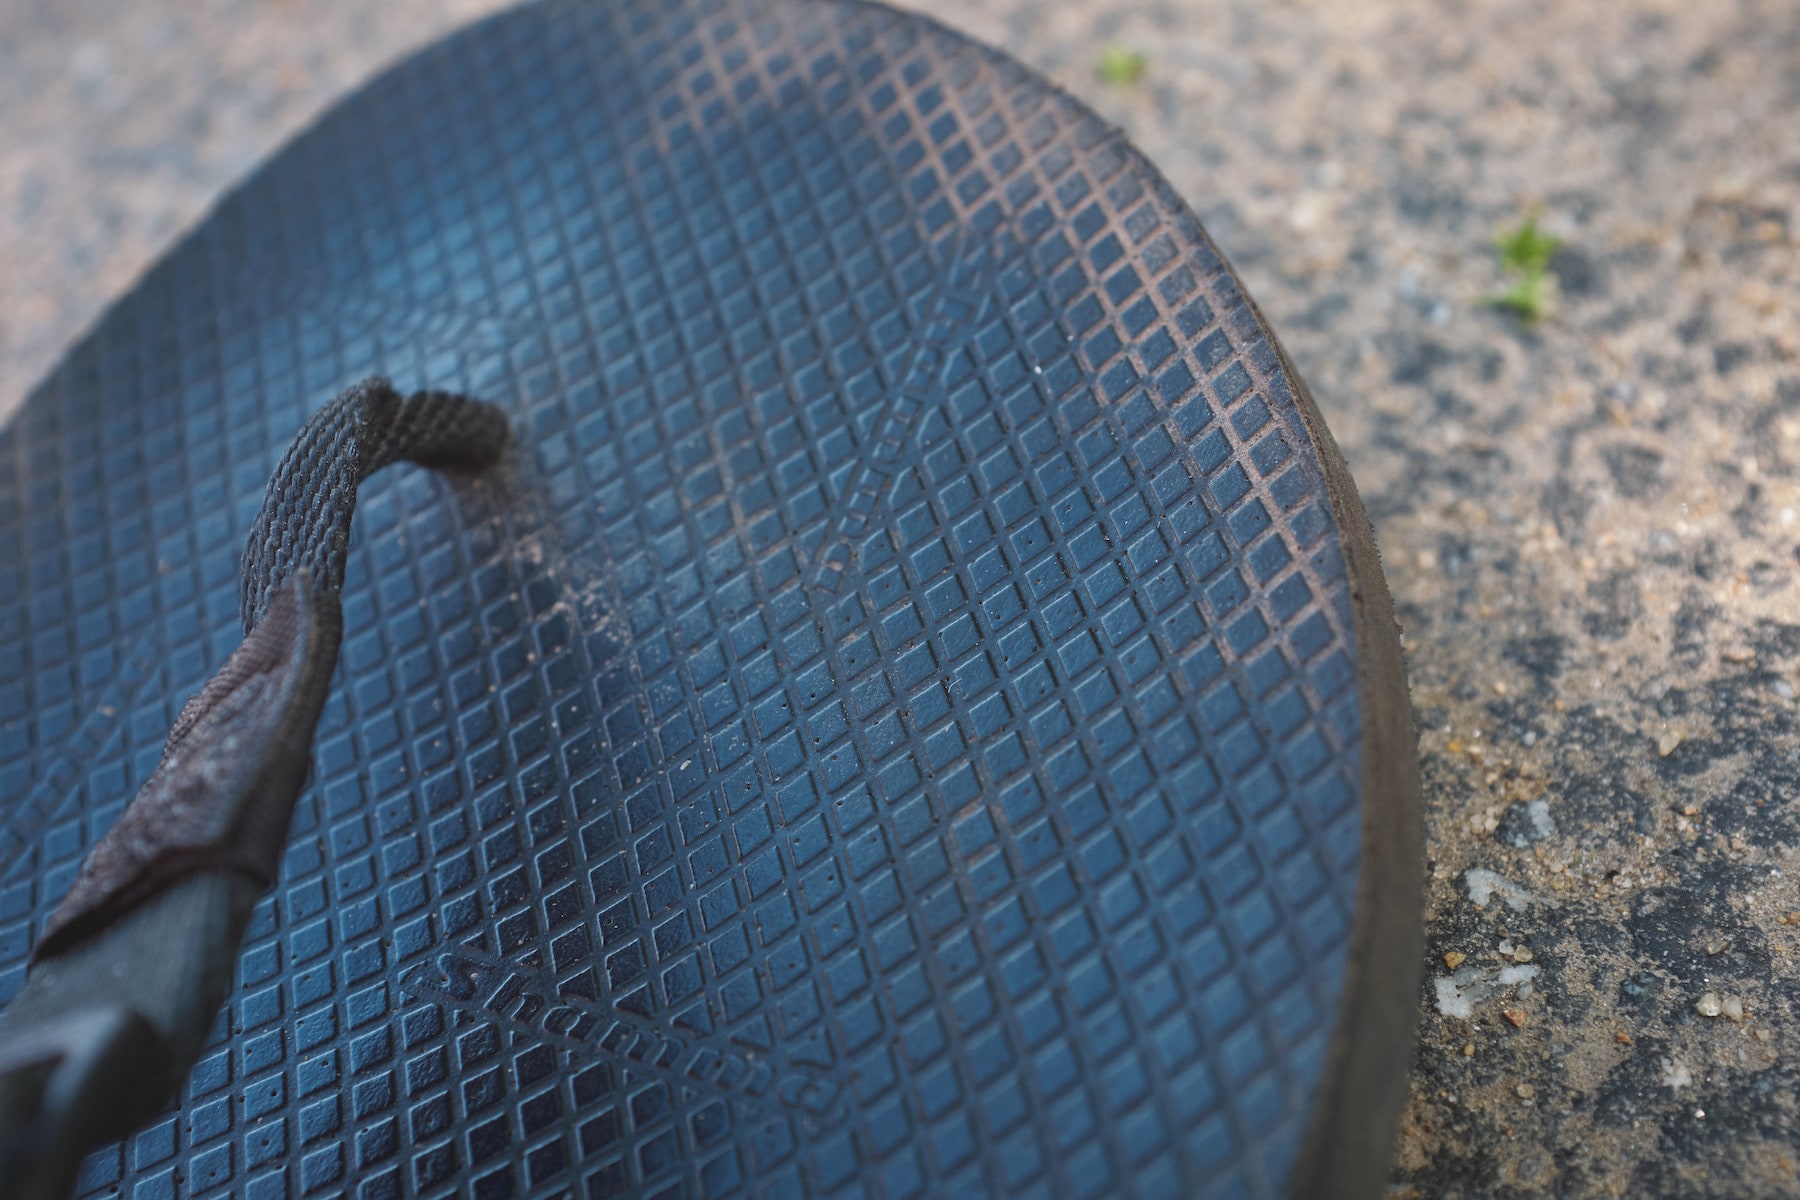  Texture details of the Ultragrip footbed